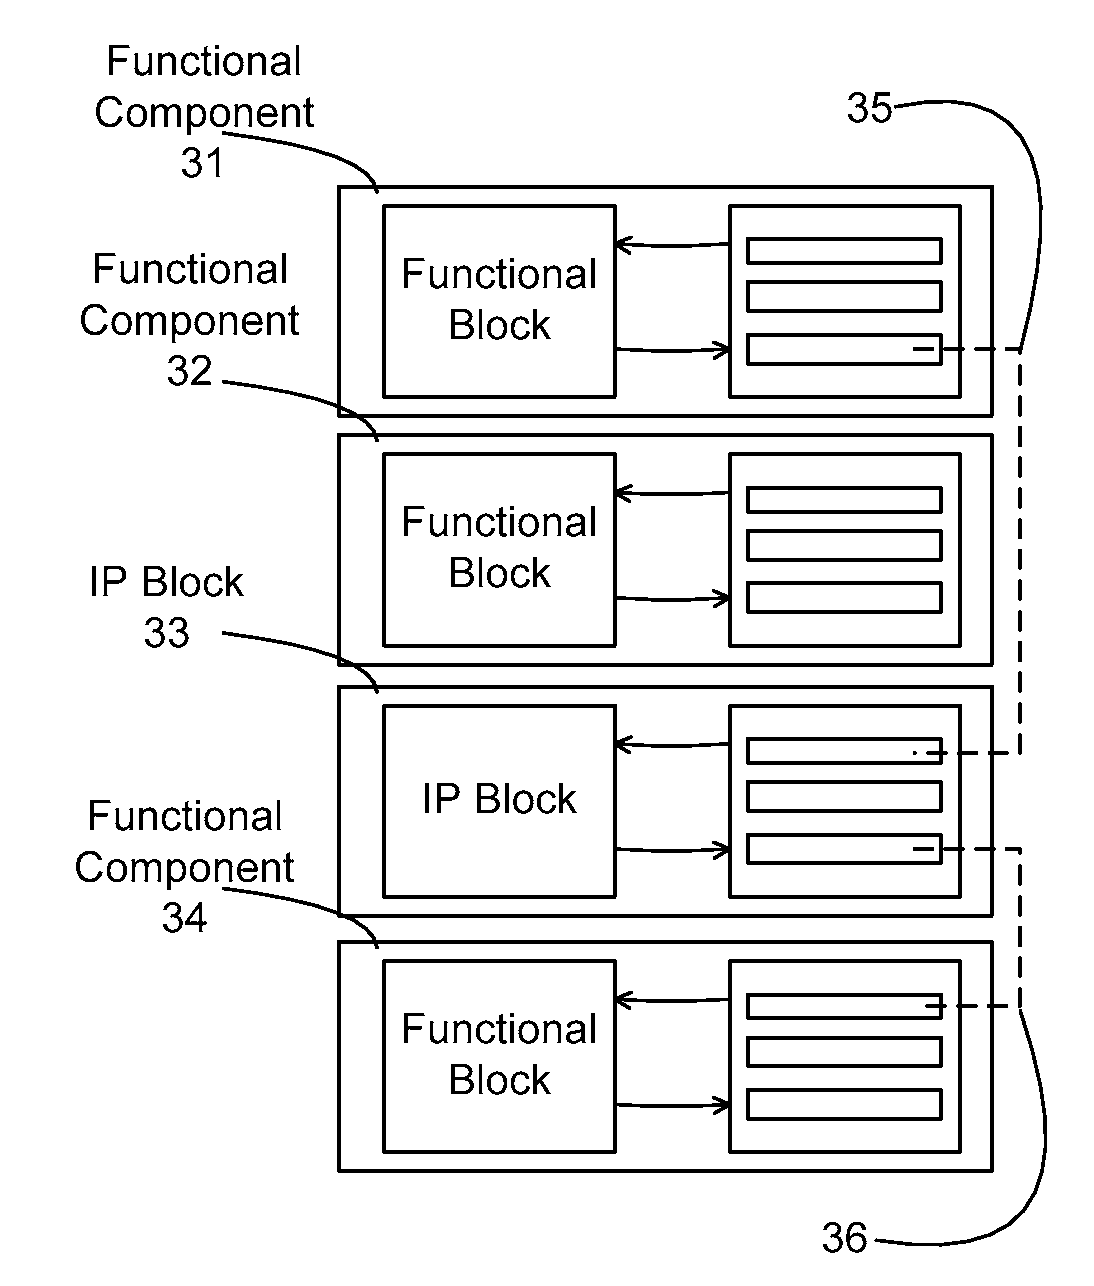 Soft-reconfigurable massively parallel architecture and programming system